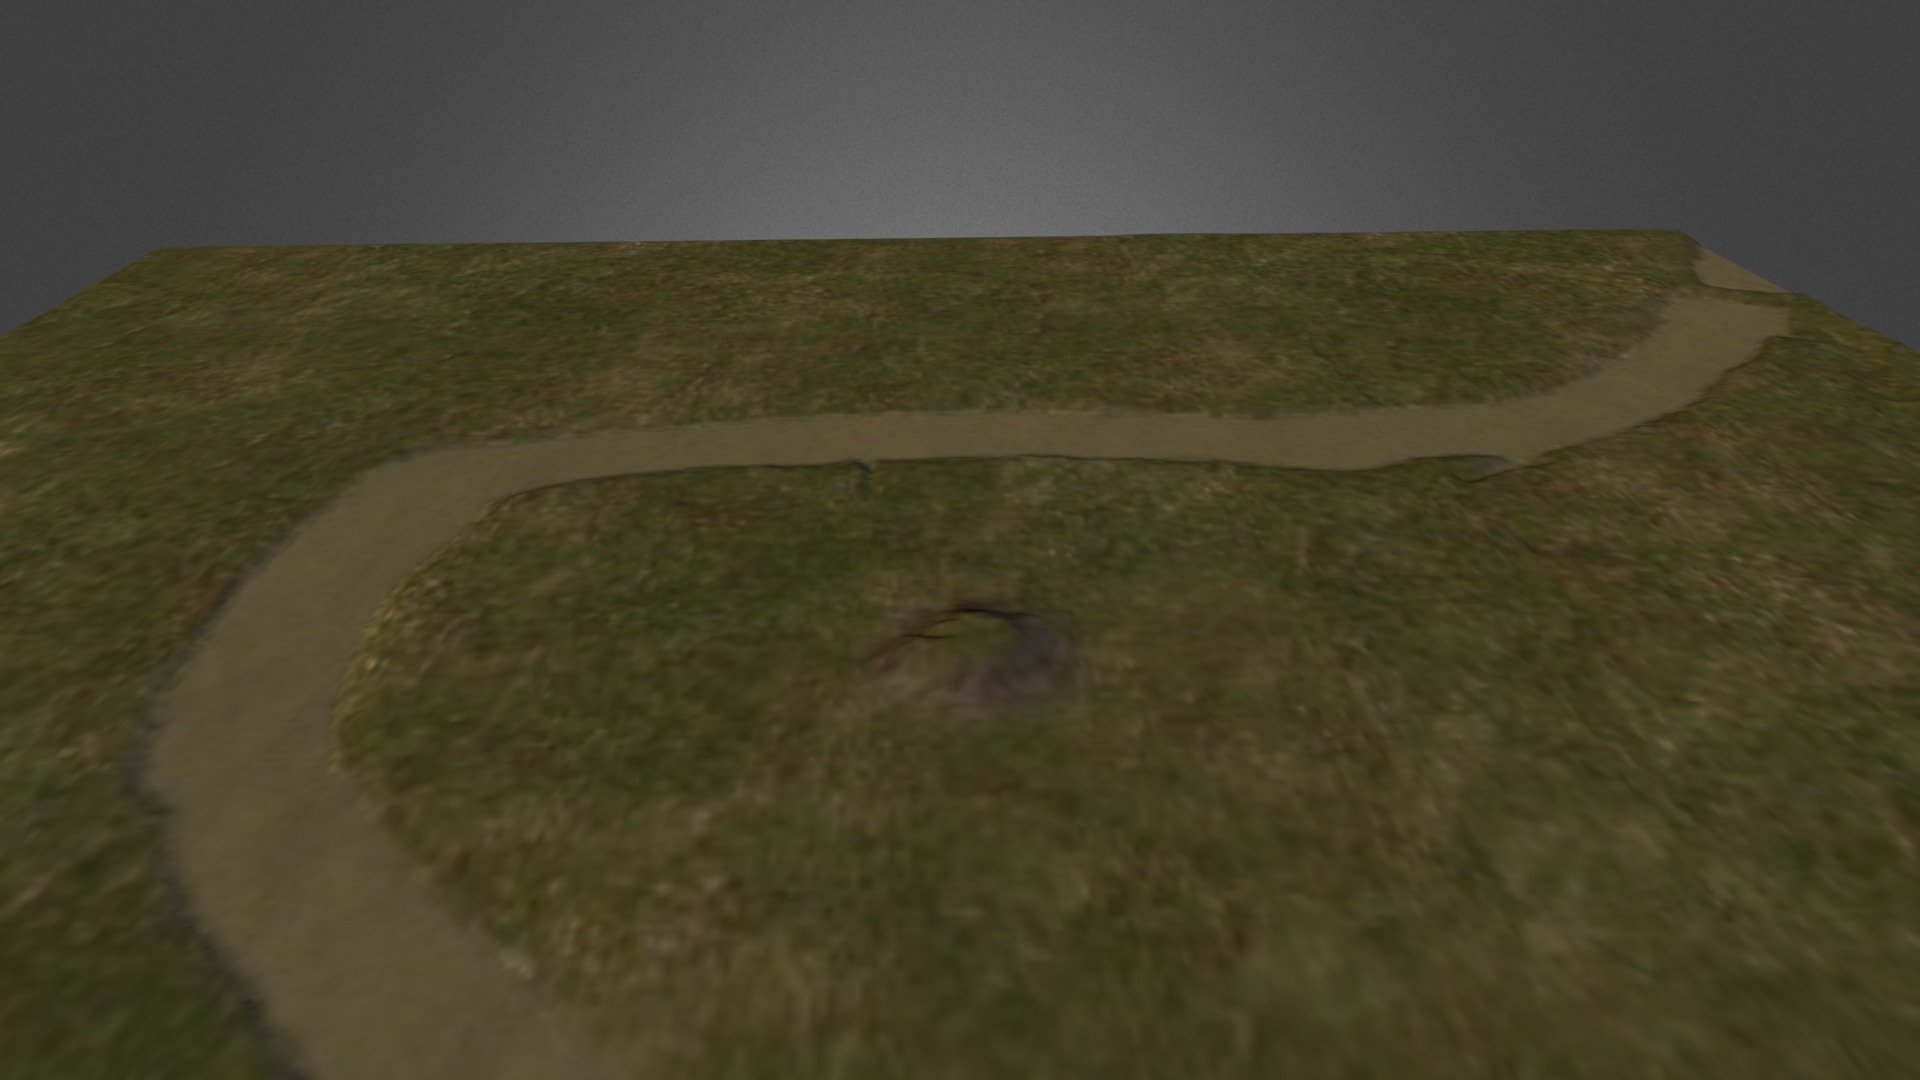 Simple terrain model of Cary Mound site in Mississippi. Created in L3DT from DEM data exported from ArcMap 3d model